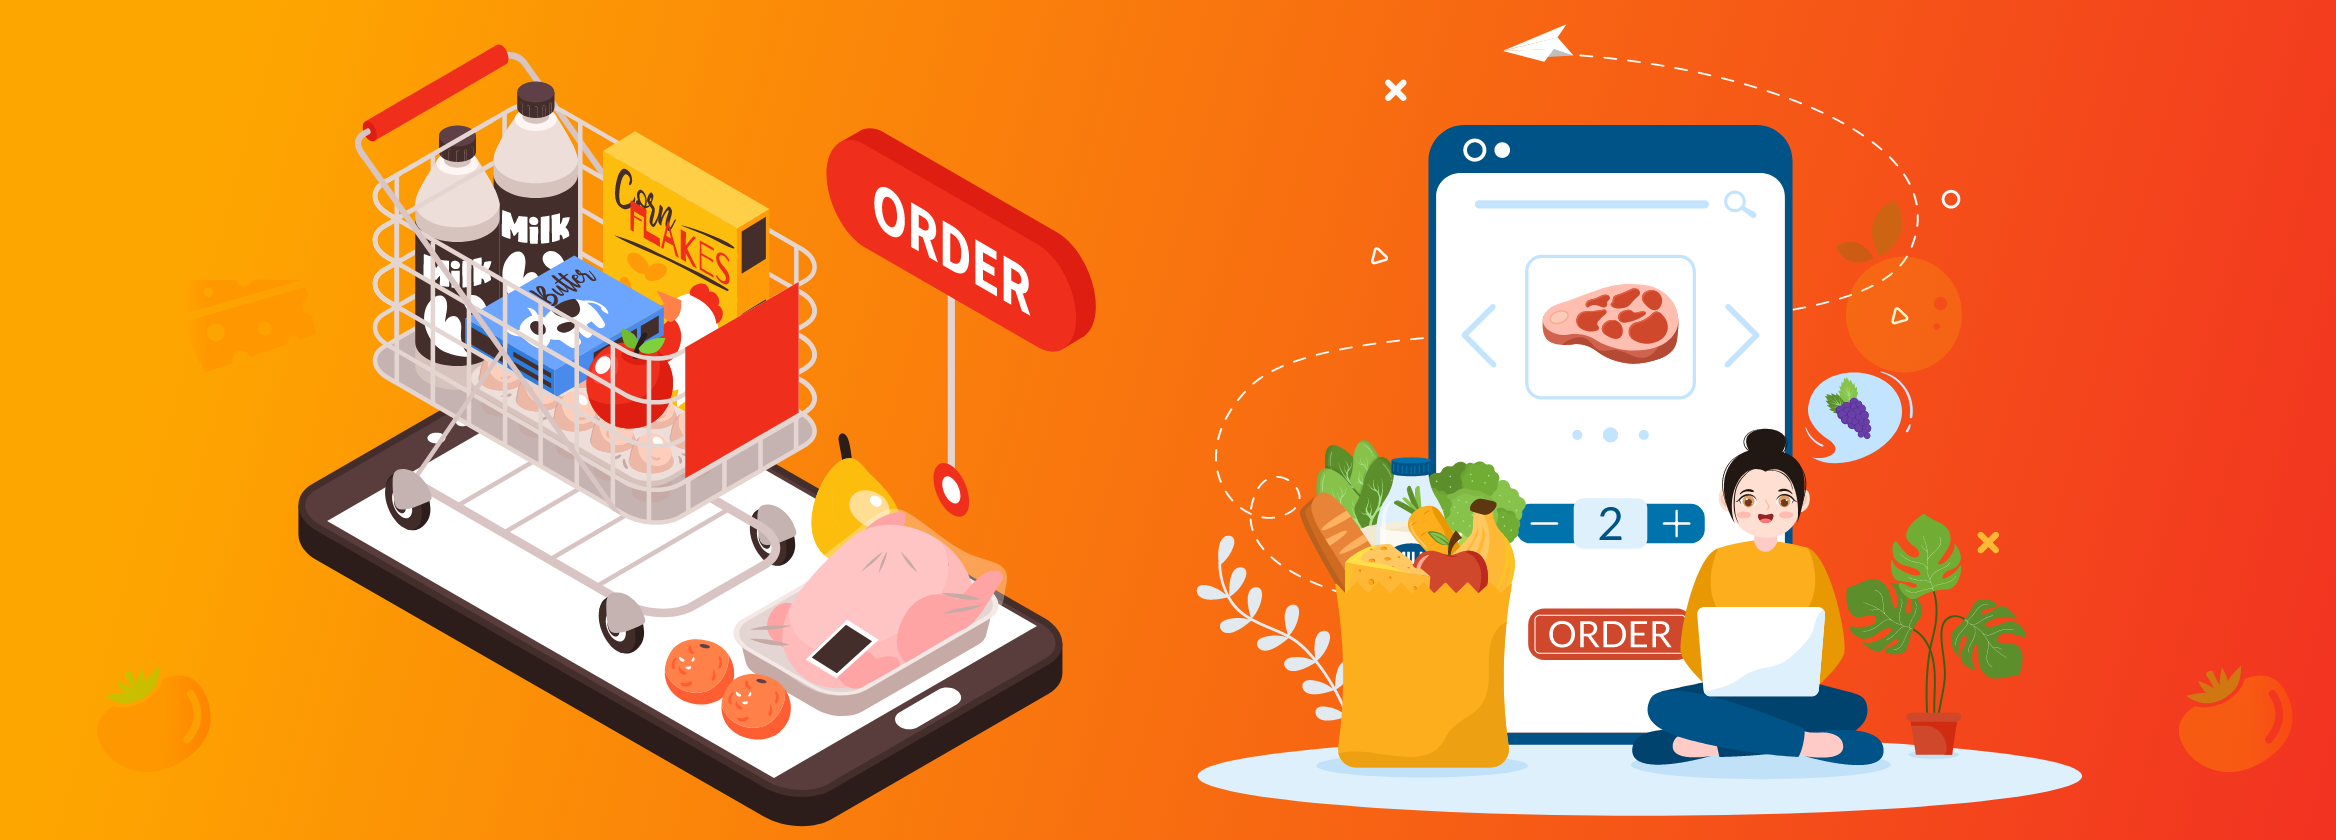 How To Start Your Grocery Delivery Business The Easiest Way!